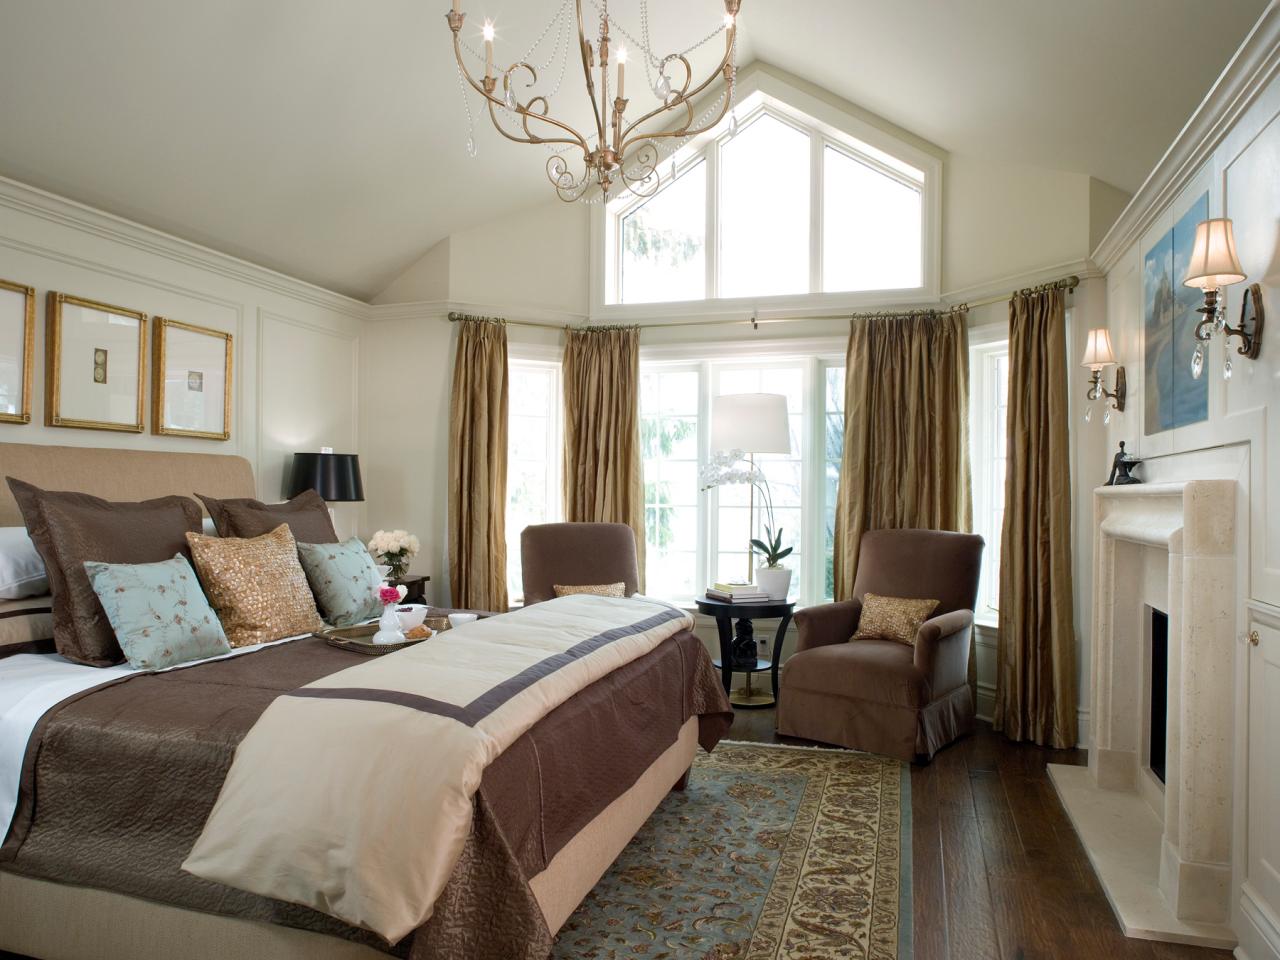 10 Divine Master Bedrooms By Candice Olson Bedrooms And Bedroom